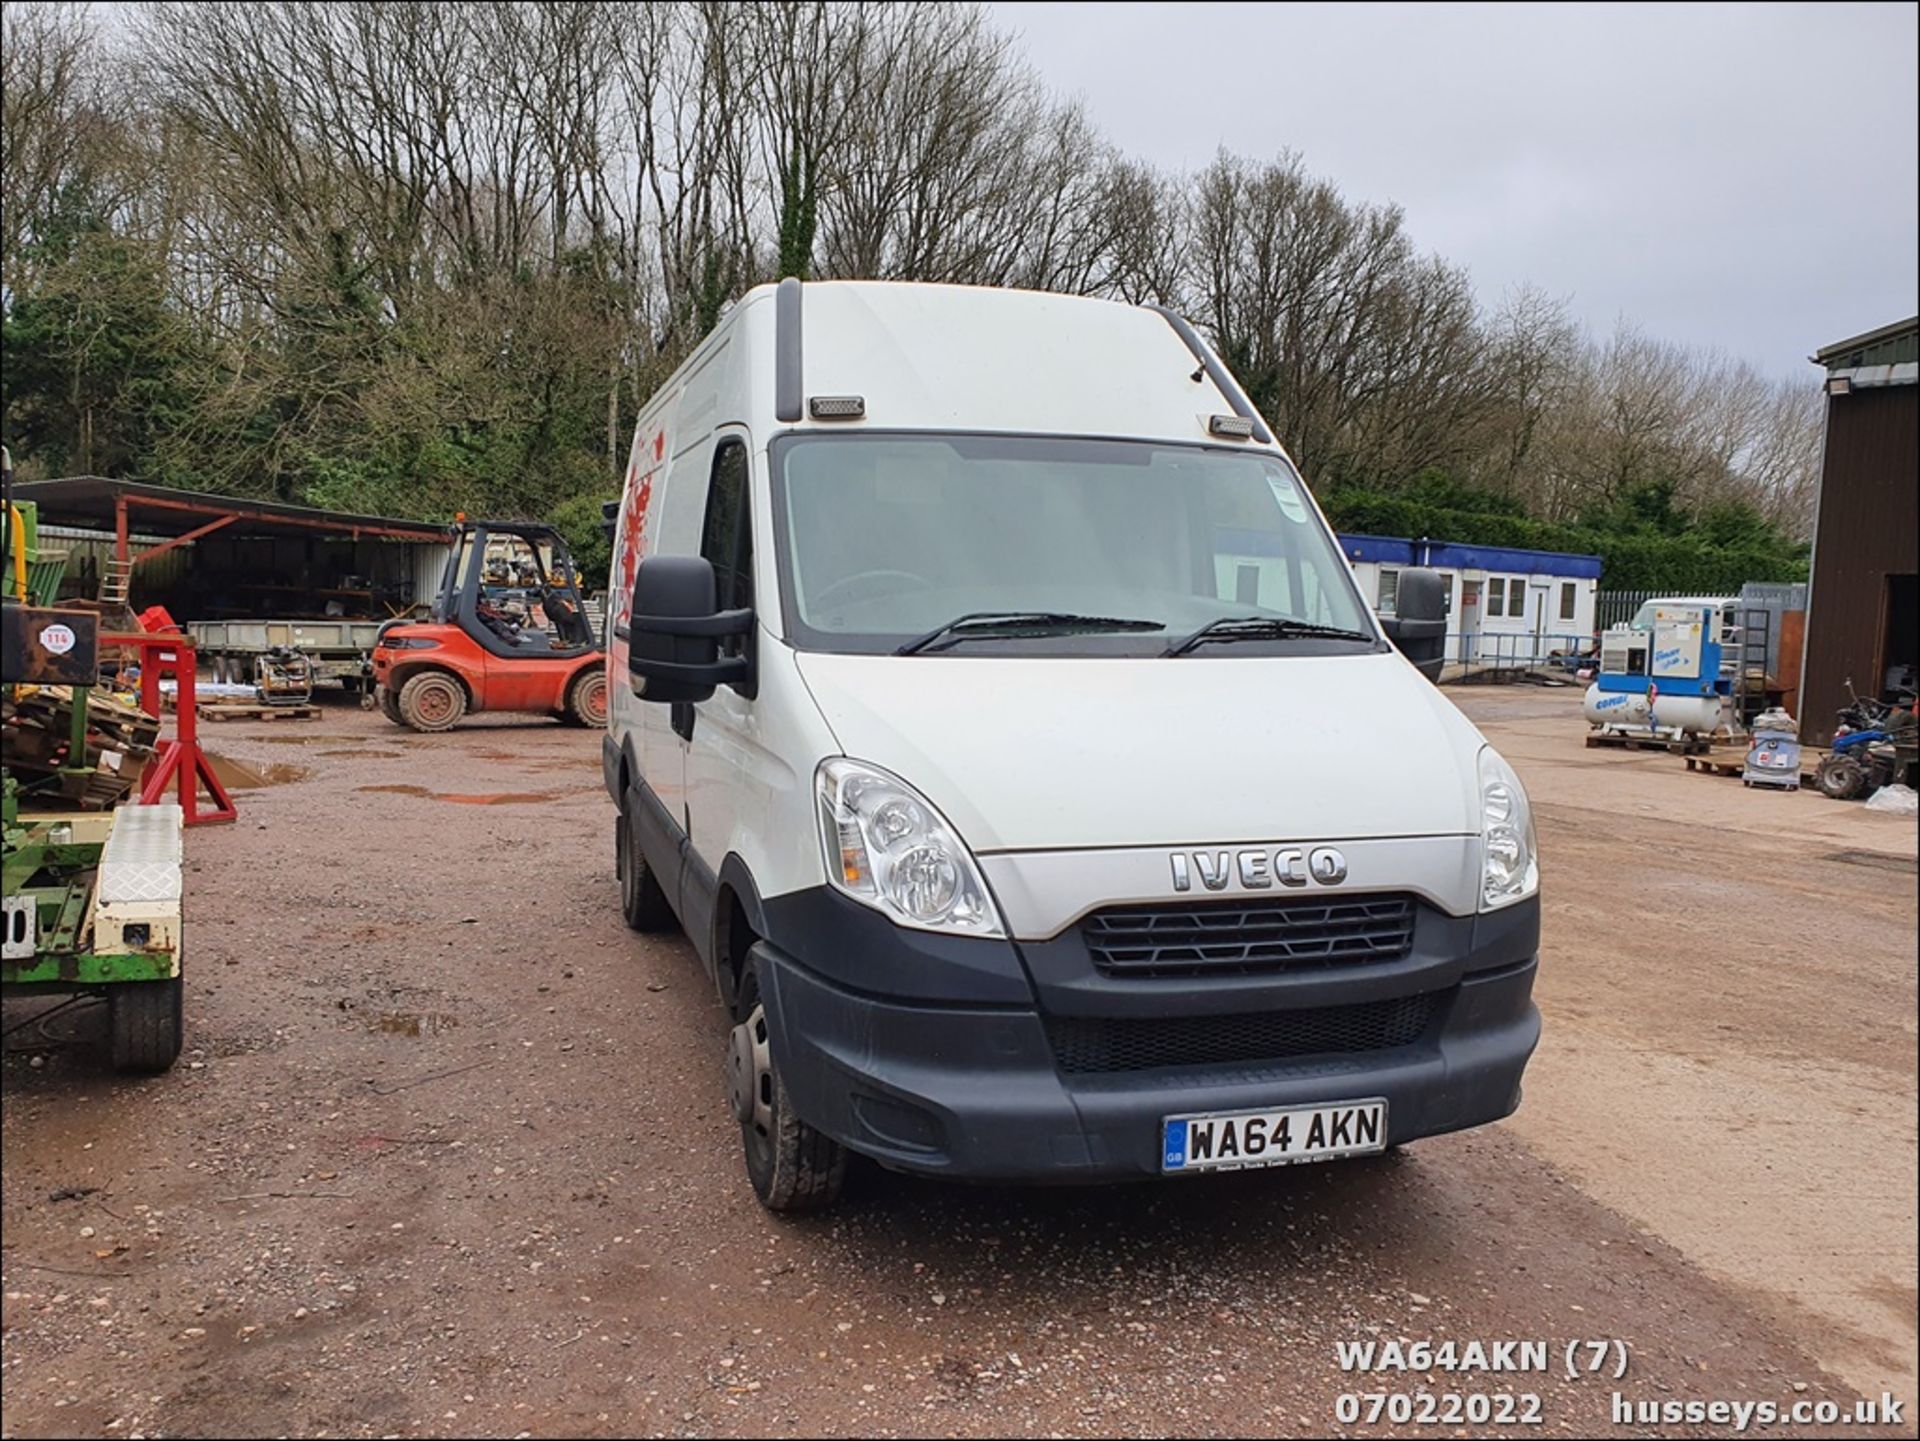 14/64 IVECO DAILY 40C13 - 2287cc 5dr Van (White) - Image 8 of 36